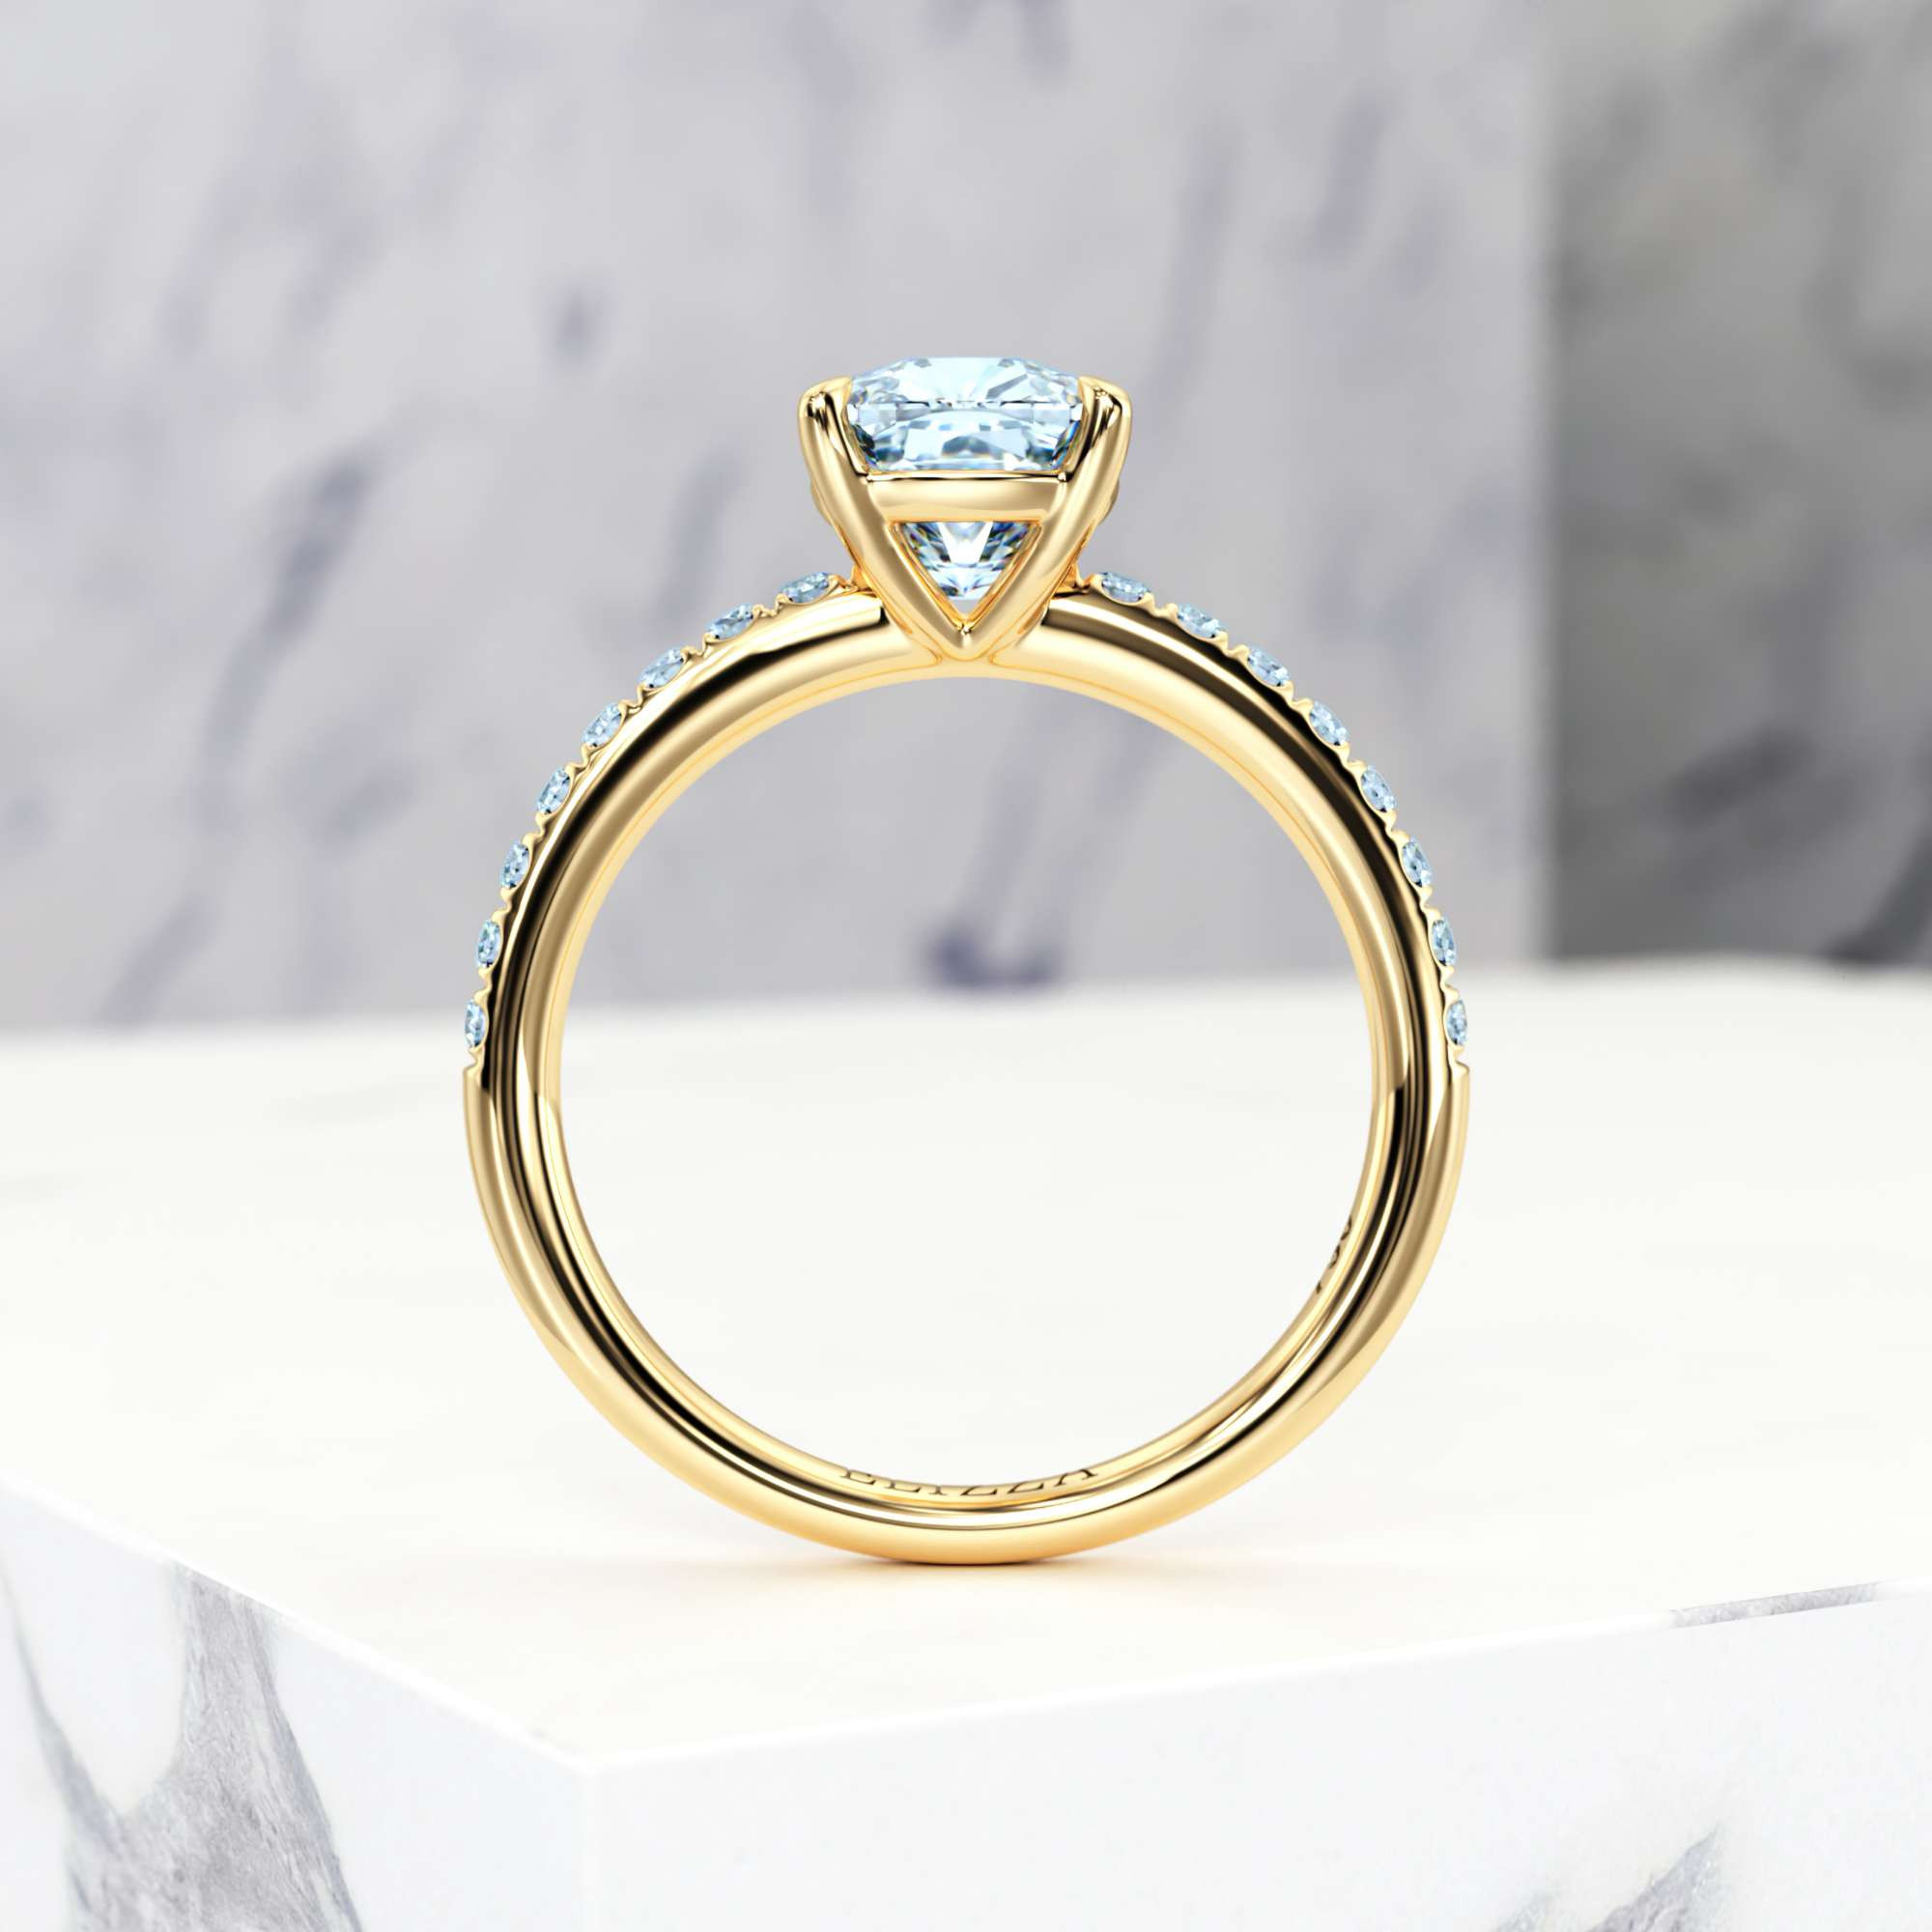 Verlobungsring Evelyn Square Cushion | Square cushion | 14K Gelbgold | Natural | GIA Certified | 0.30ct SI1 H 4